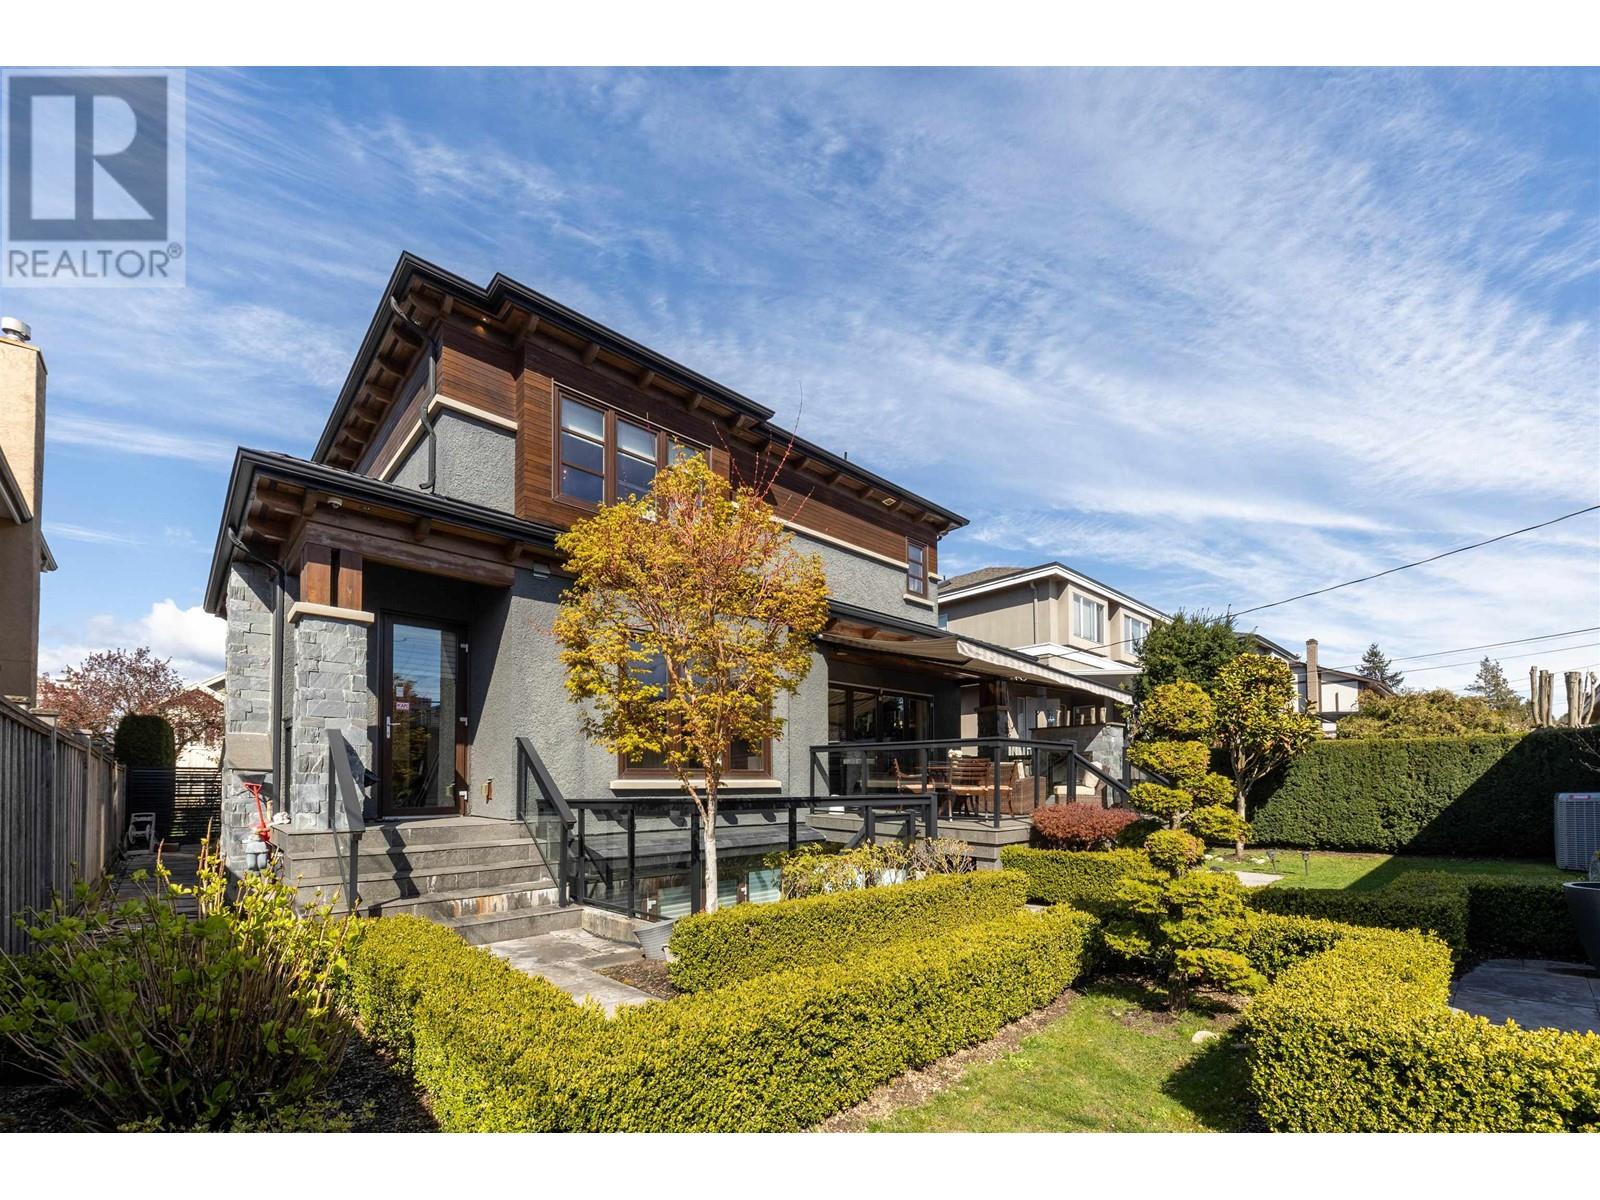 2608 W 22ND AVENUE, Vancouver